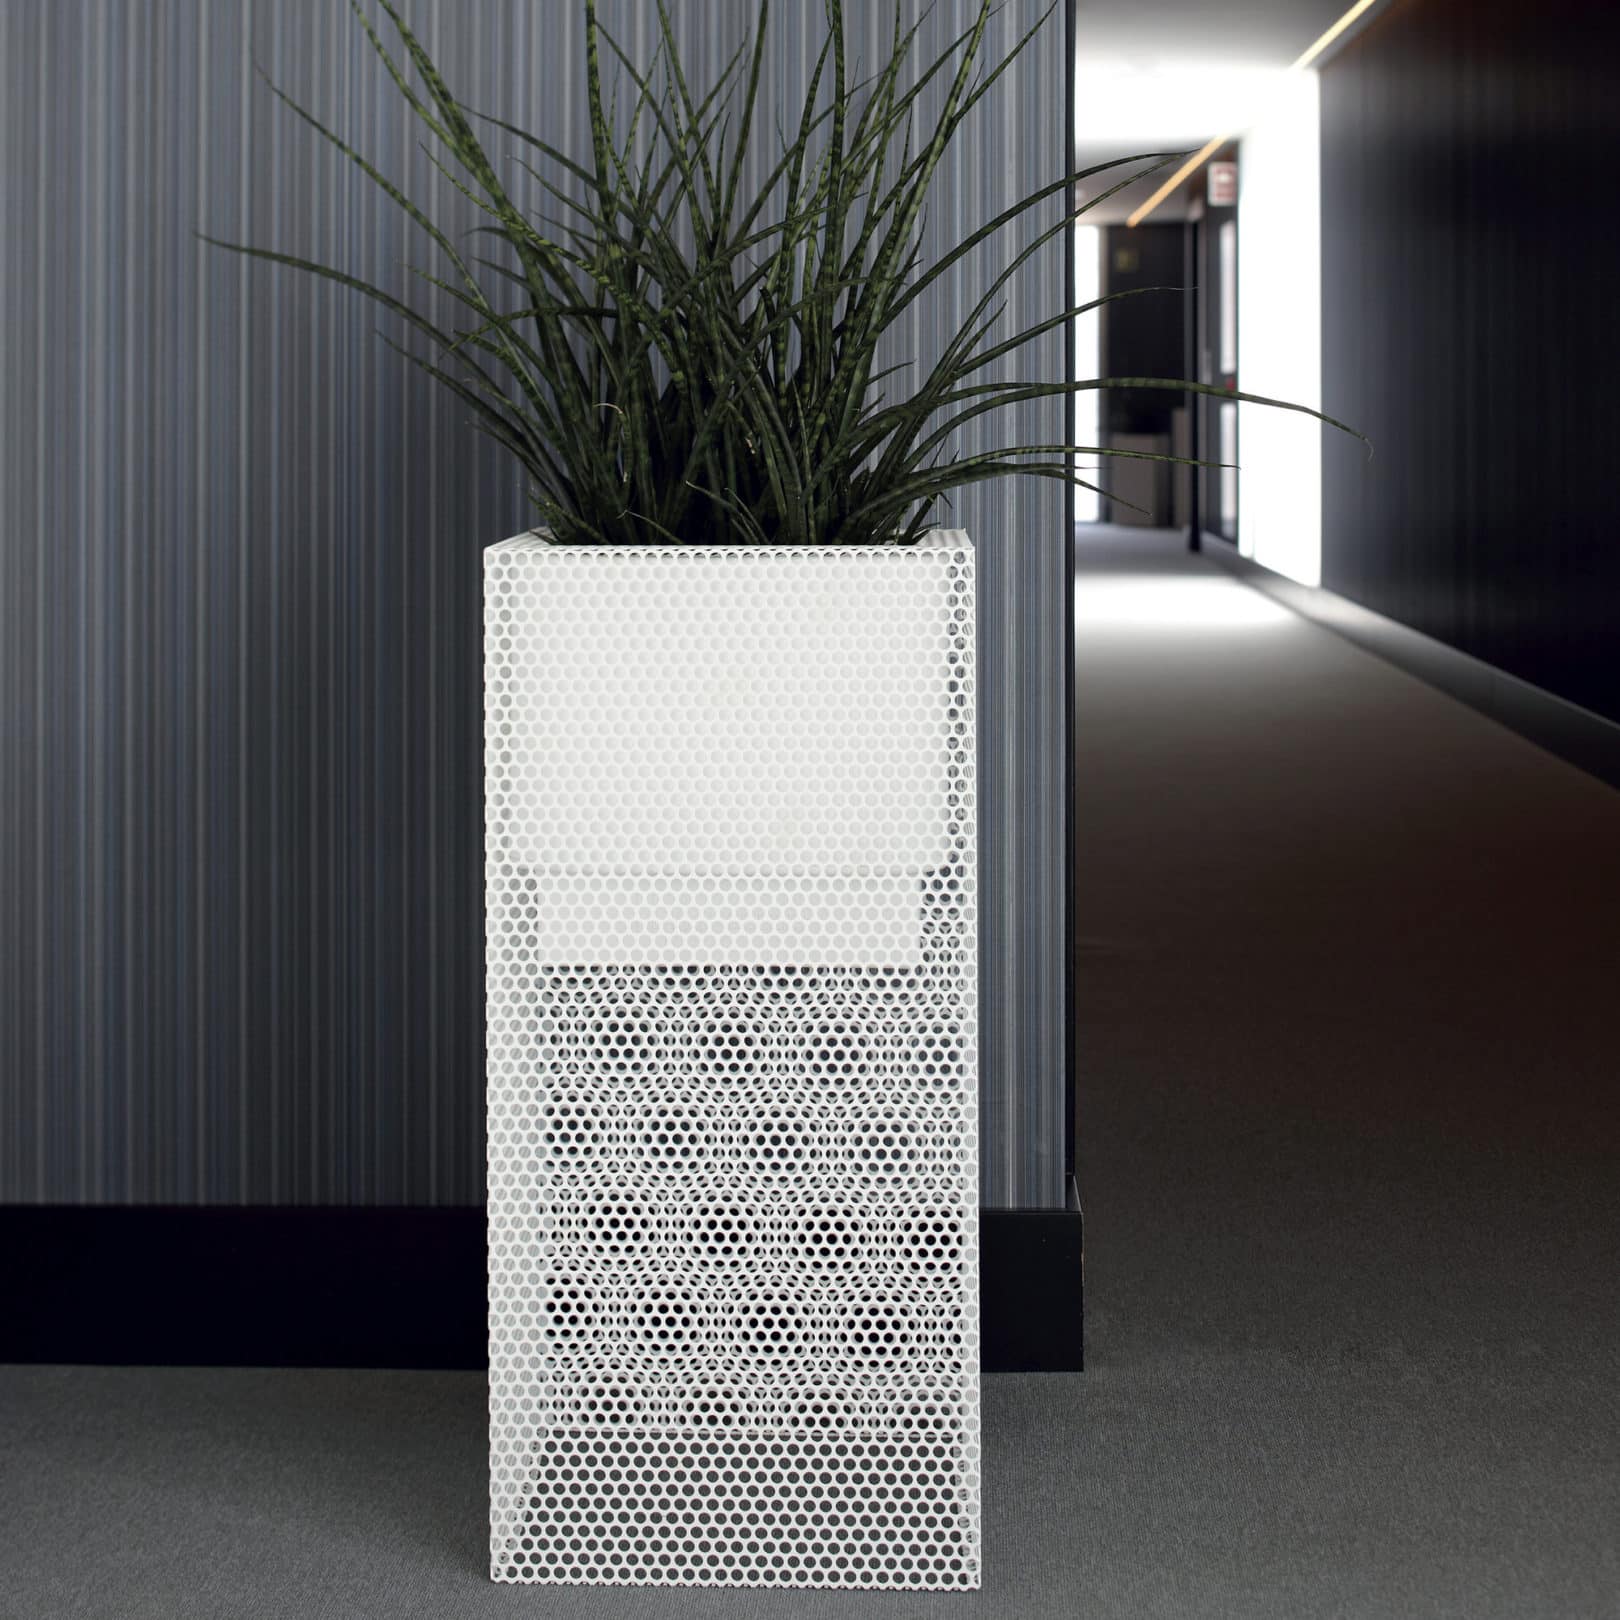 Hallway with Ferrum Perforated Tall Square planter